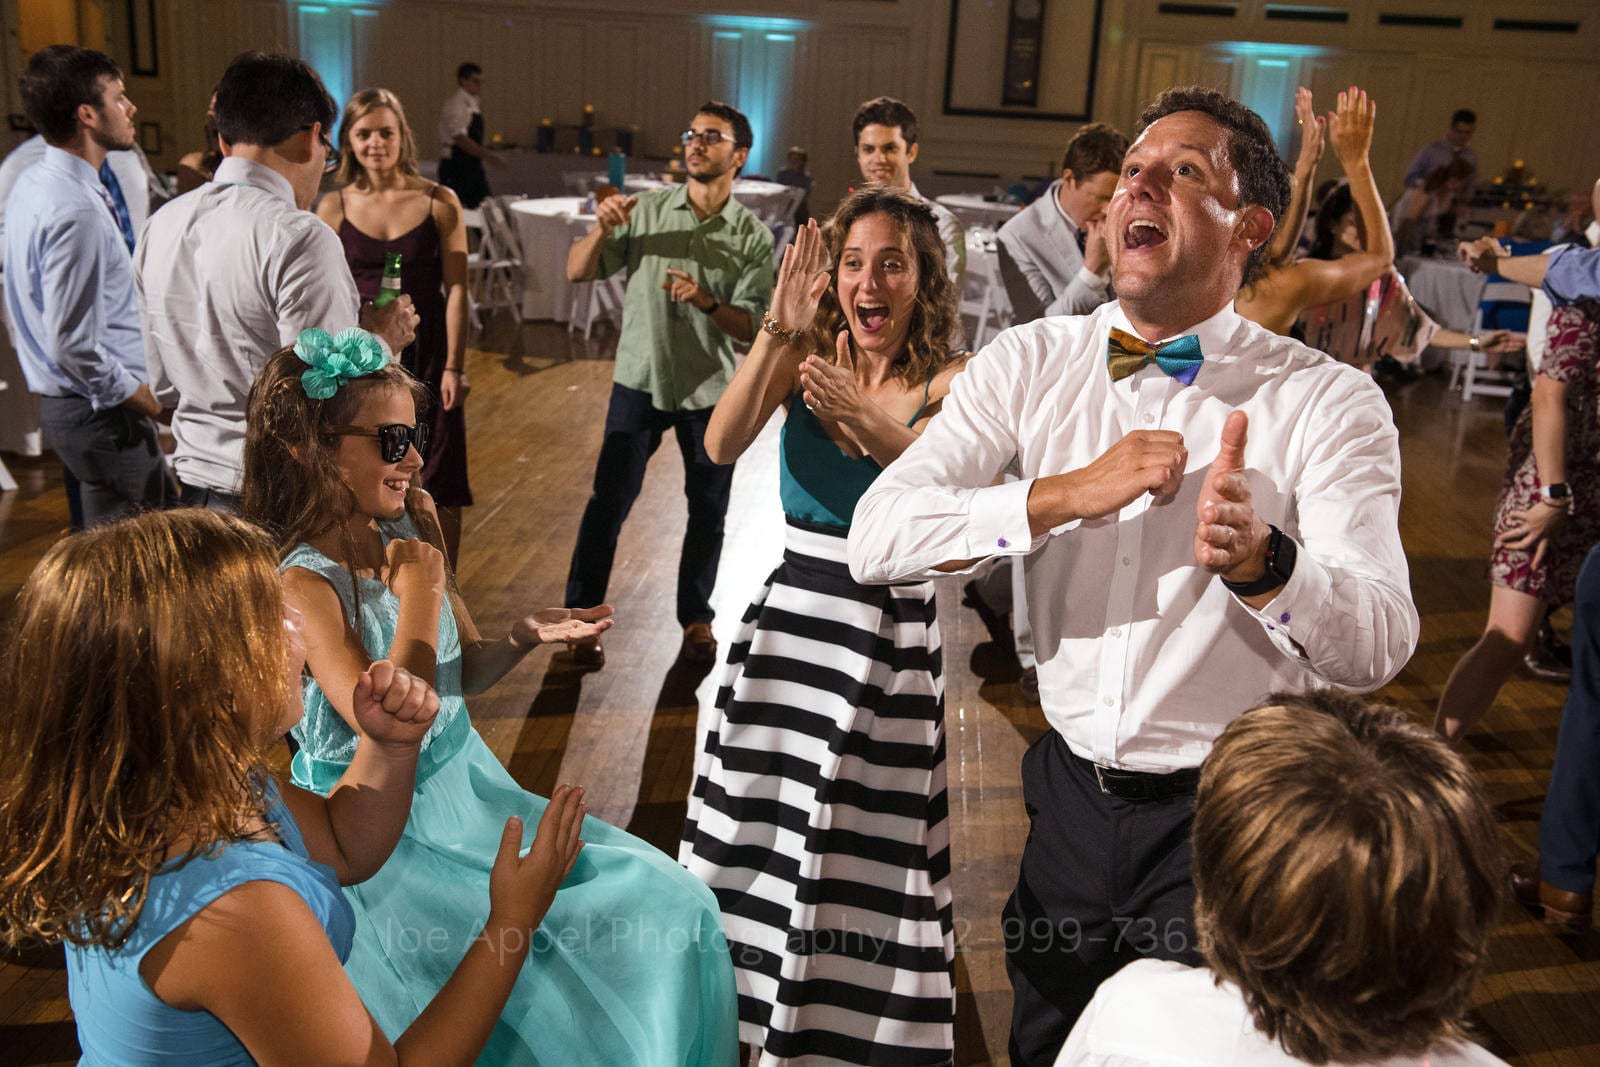 A man in a white shirt and a bow tie dances with young girls in blue dresses during a Soldiers and Sailors Wedding Photos.